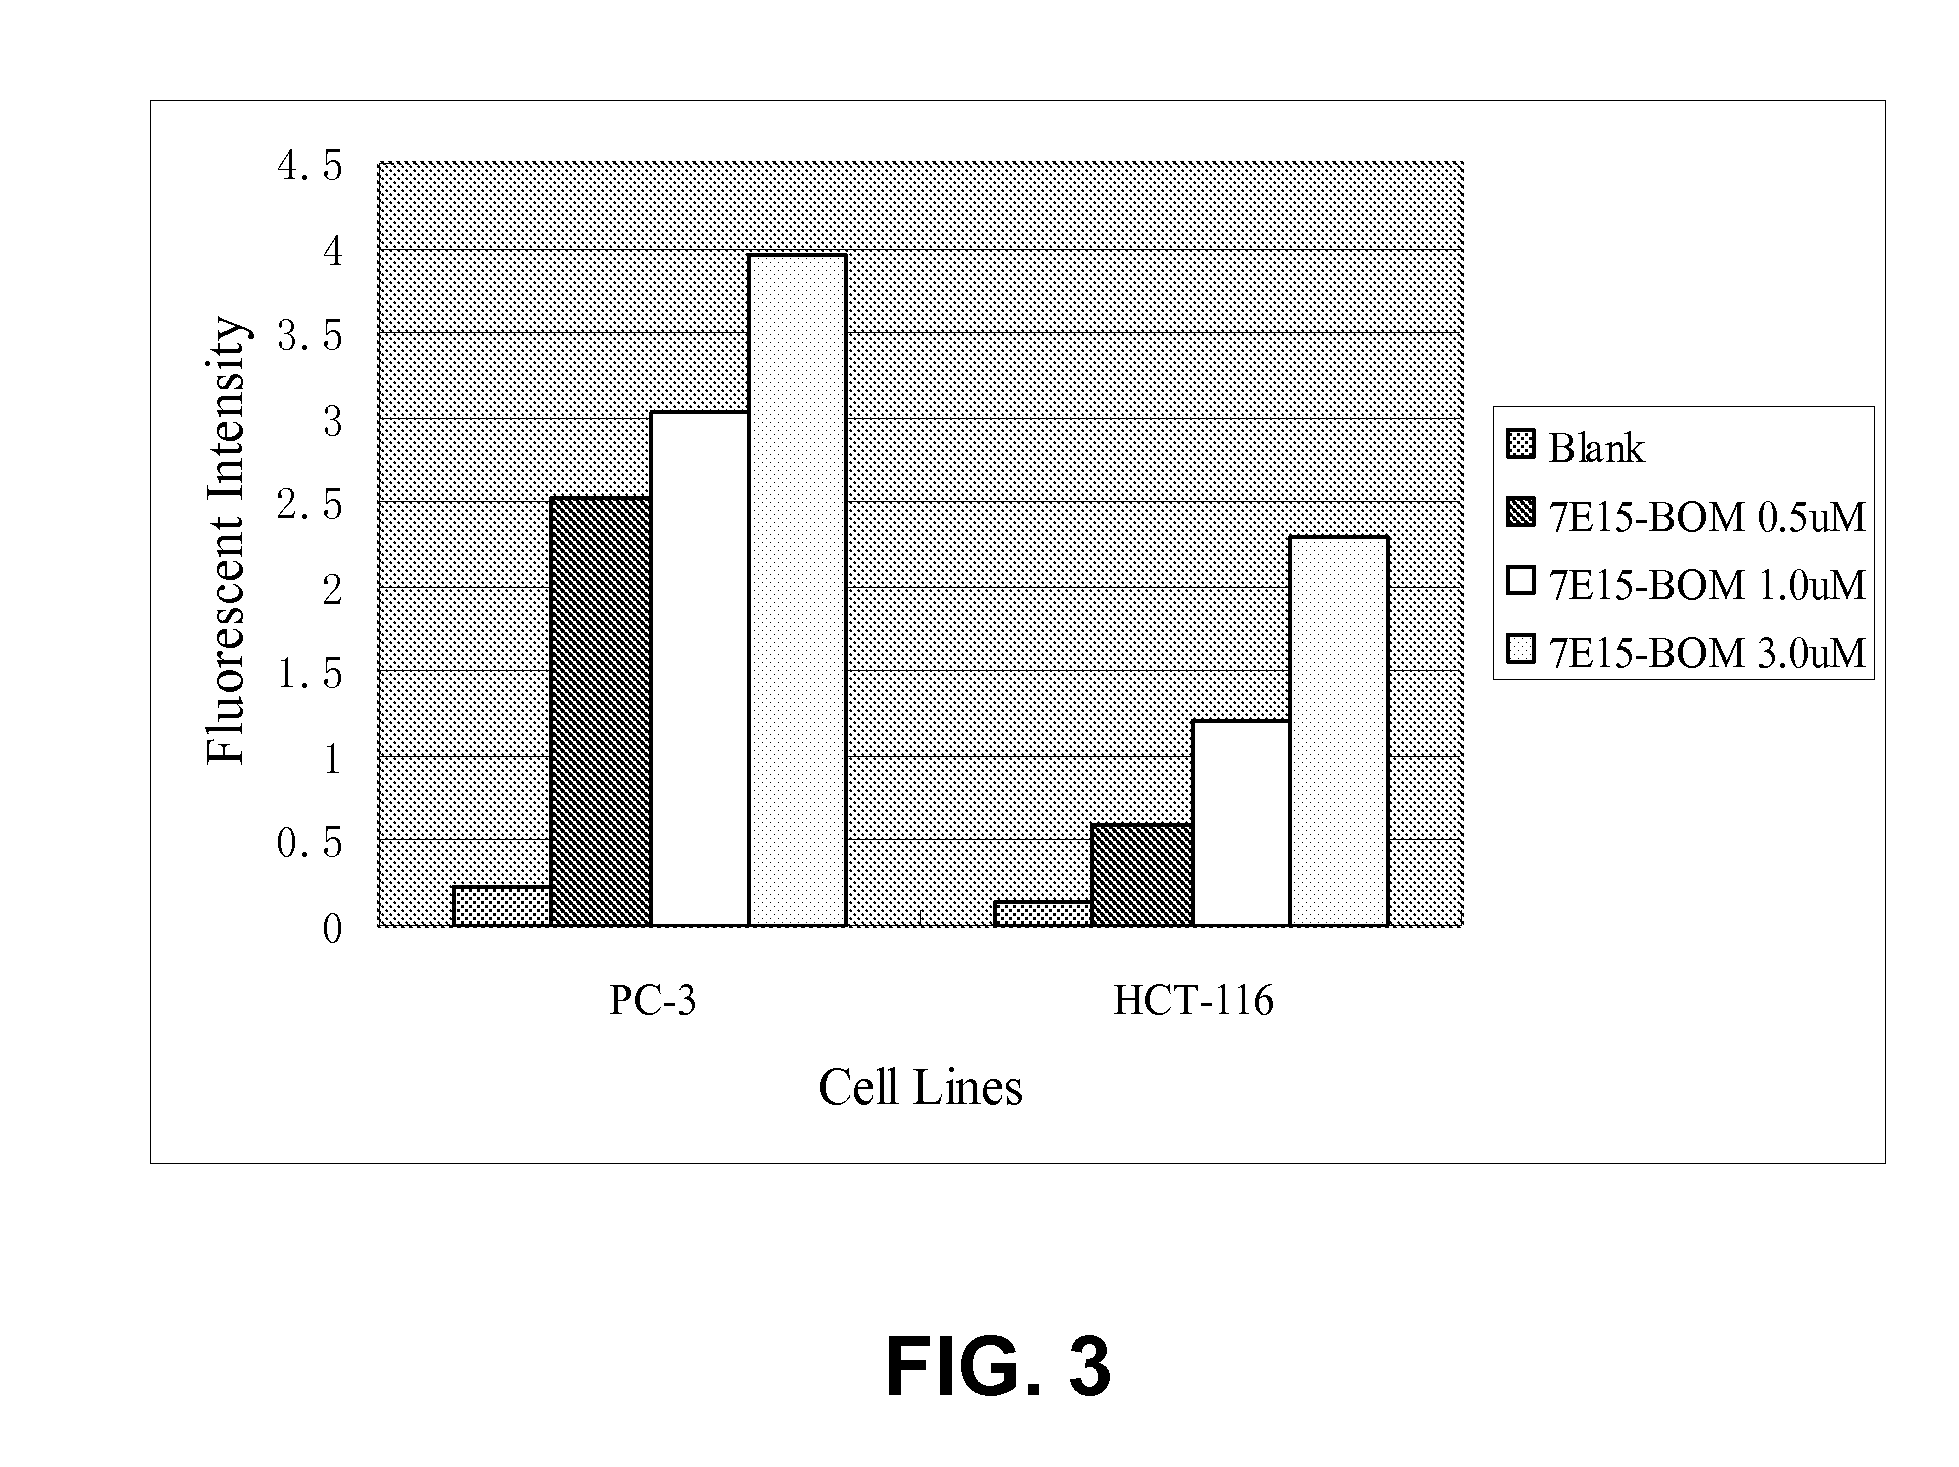 Targeted contrast agents and methods for targeting contrast agents